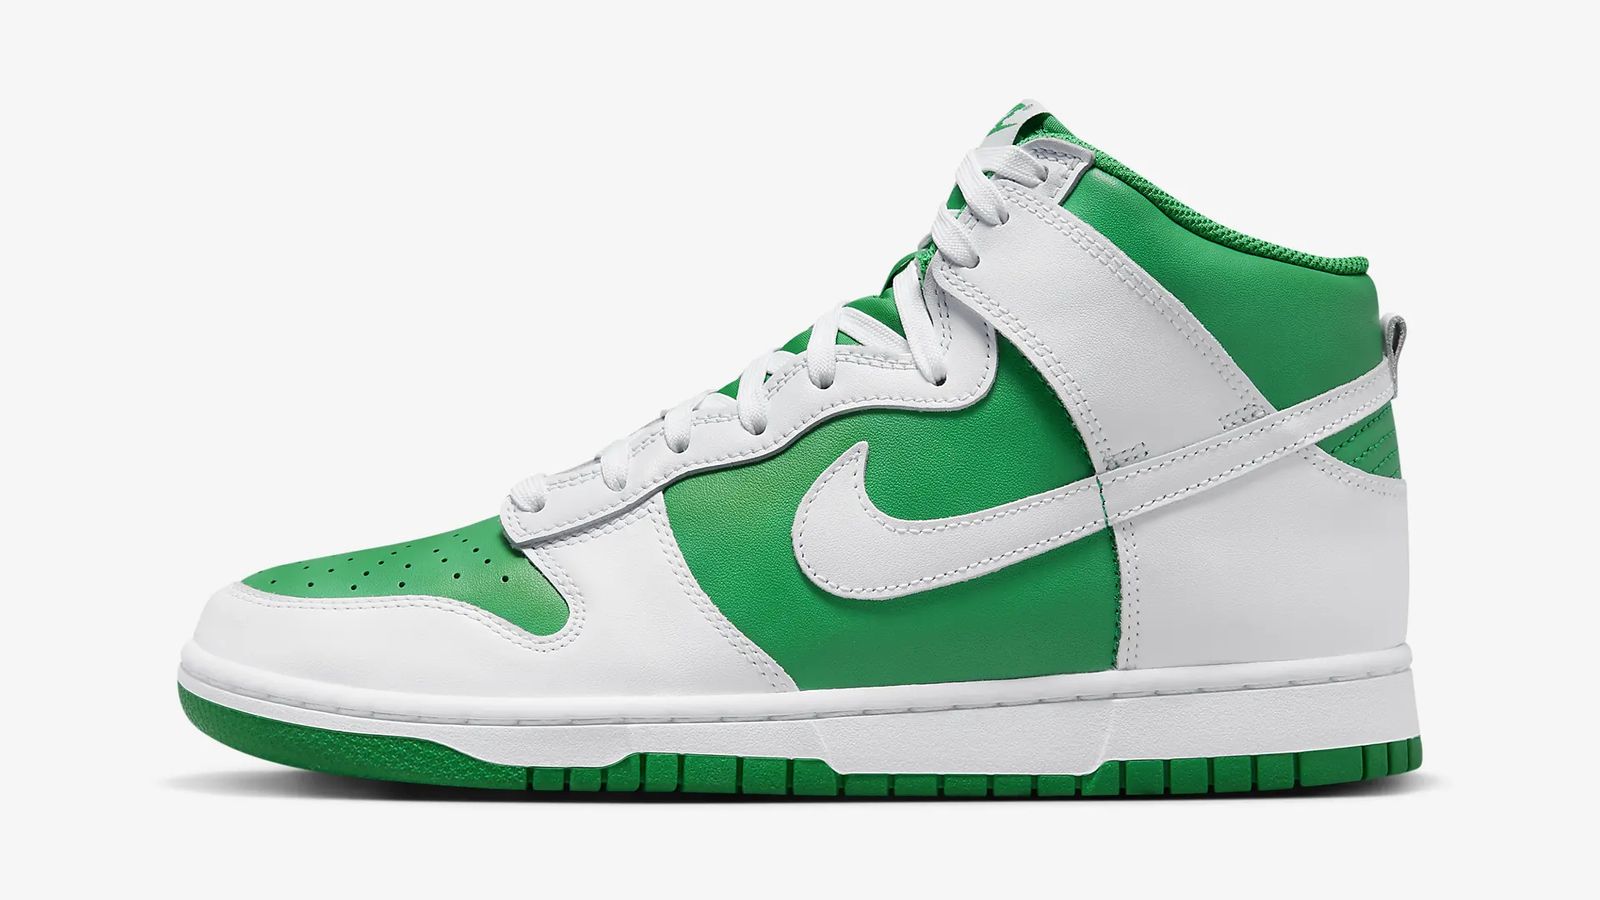 Nike Dunk High "Stadium Green" product image of a white and green leather Nike Dunk high-top.